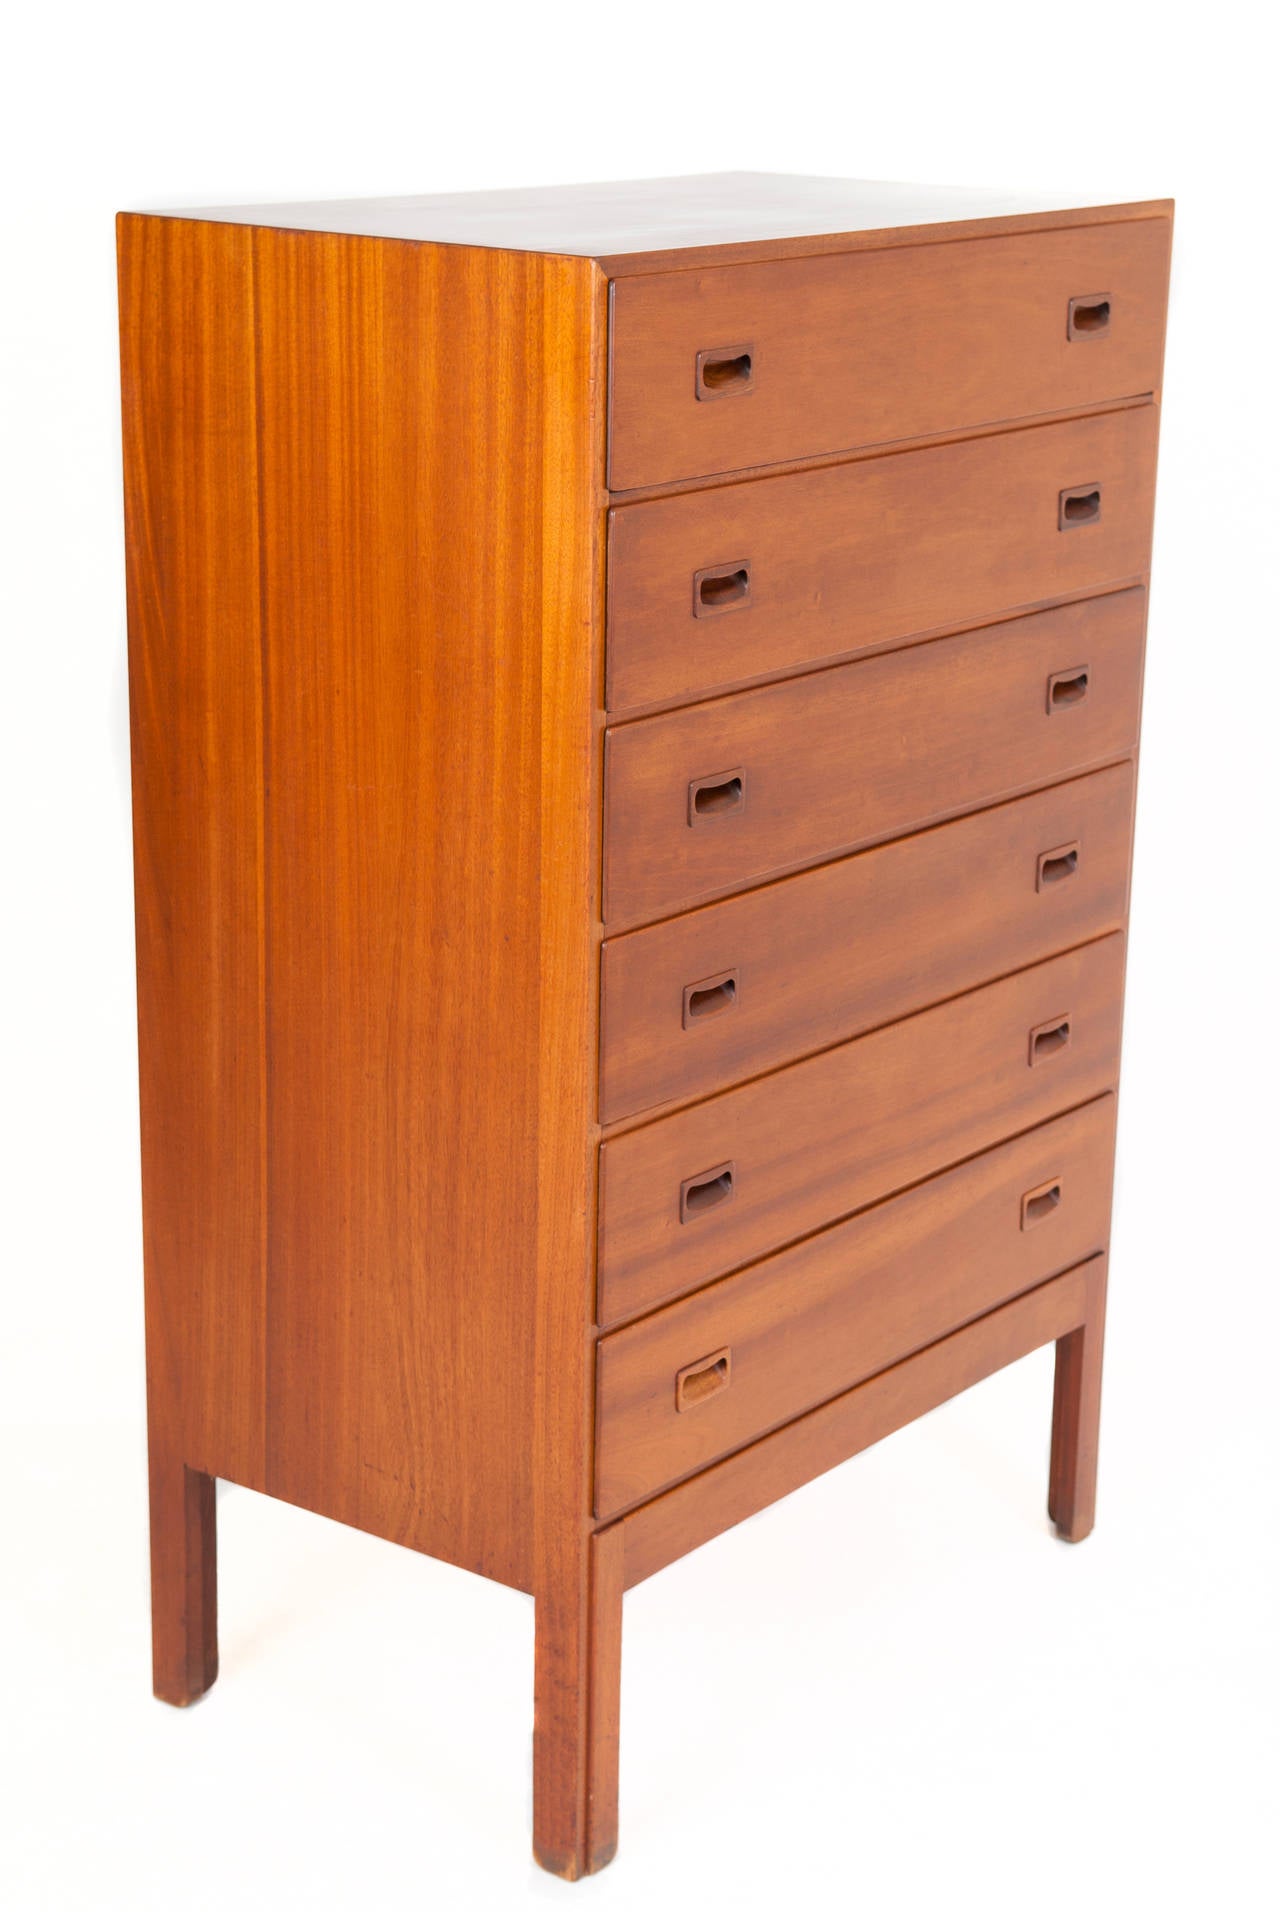 Børge Mogensen Tall chest of drawers. 

Designed ca 1950
Produced by master cabinetmaker Erhard Rasmussen

H. 140 W. 90 D. 52 cm.